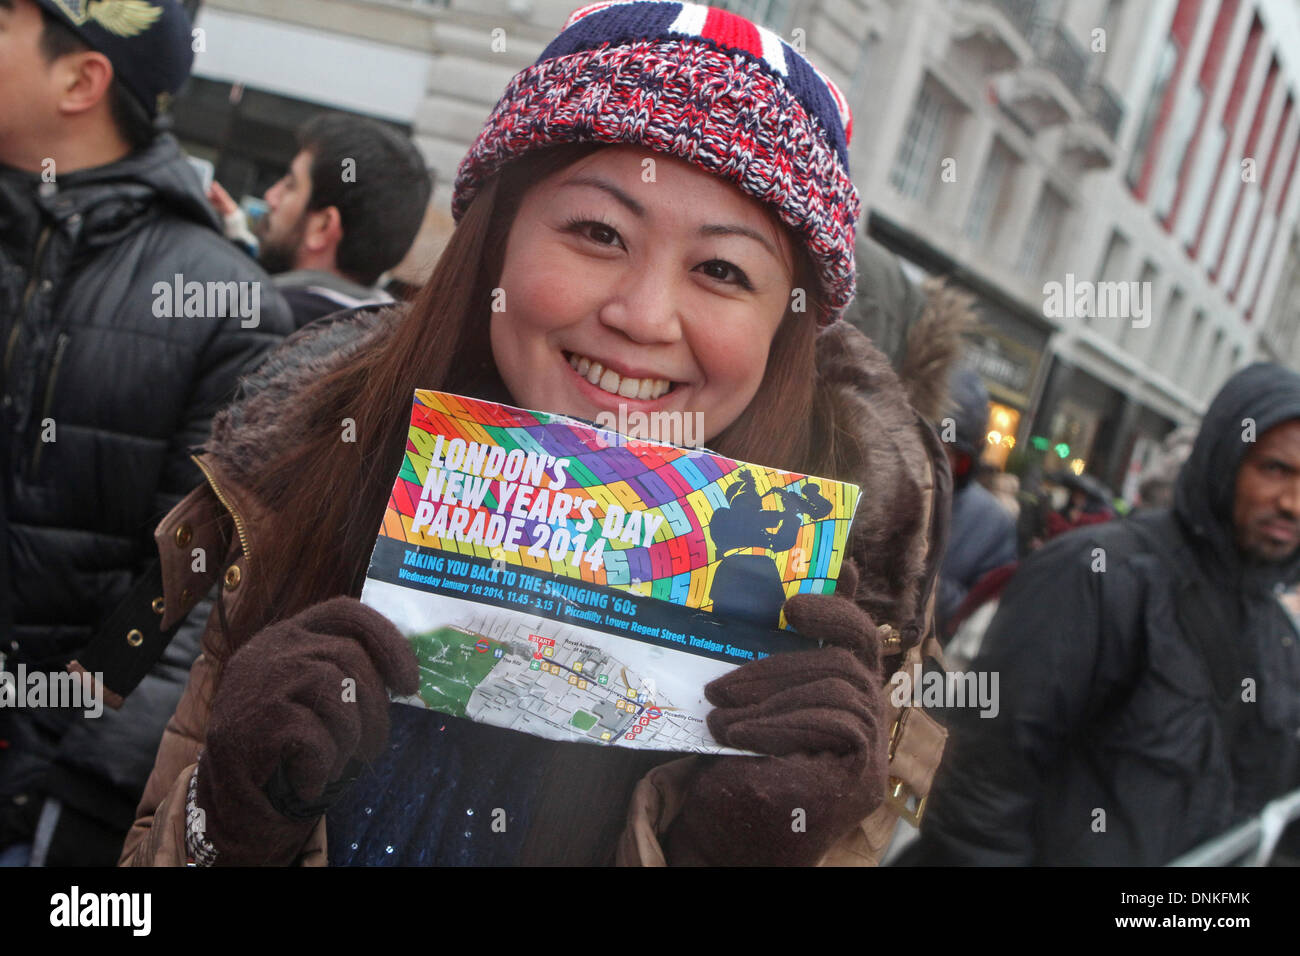 London,UK,1st January 2014,Waiting, despite the rain, for the London's New Year's Day Parade 2014 Credit: Keith Larby/Alamy Live News Stock Photo